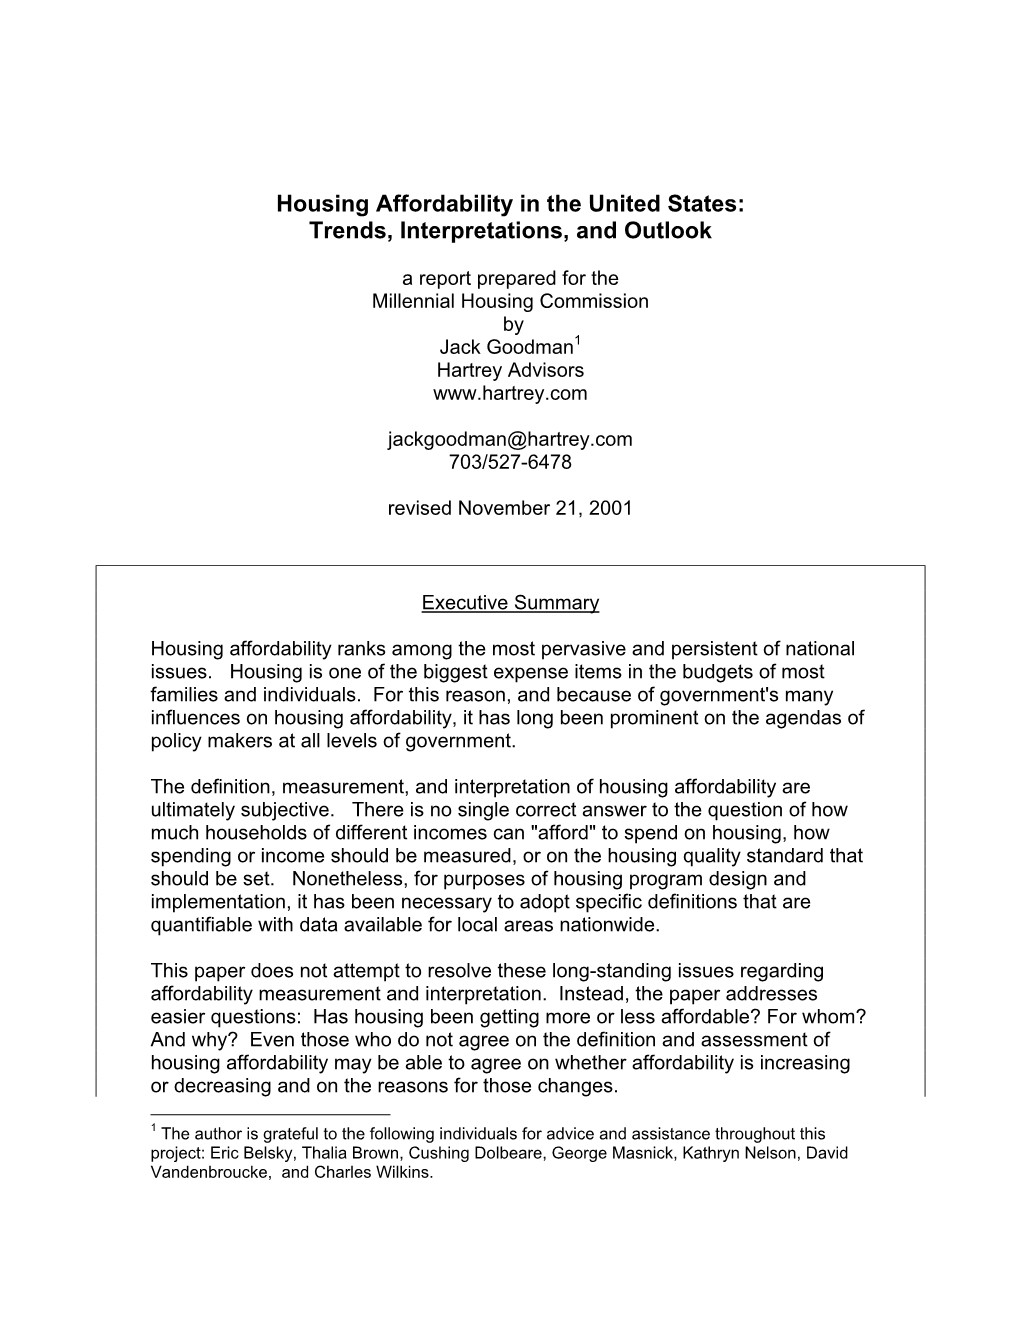 Housing Affordability in the United States: Trends, Interpretations, and Outlook